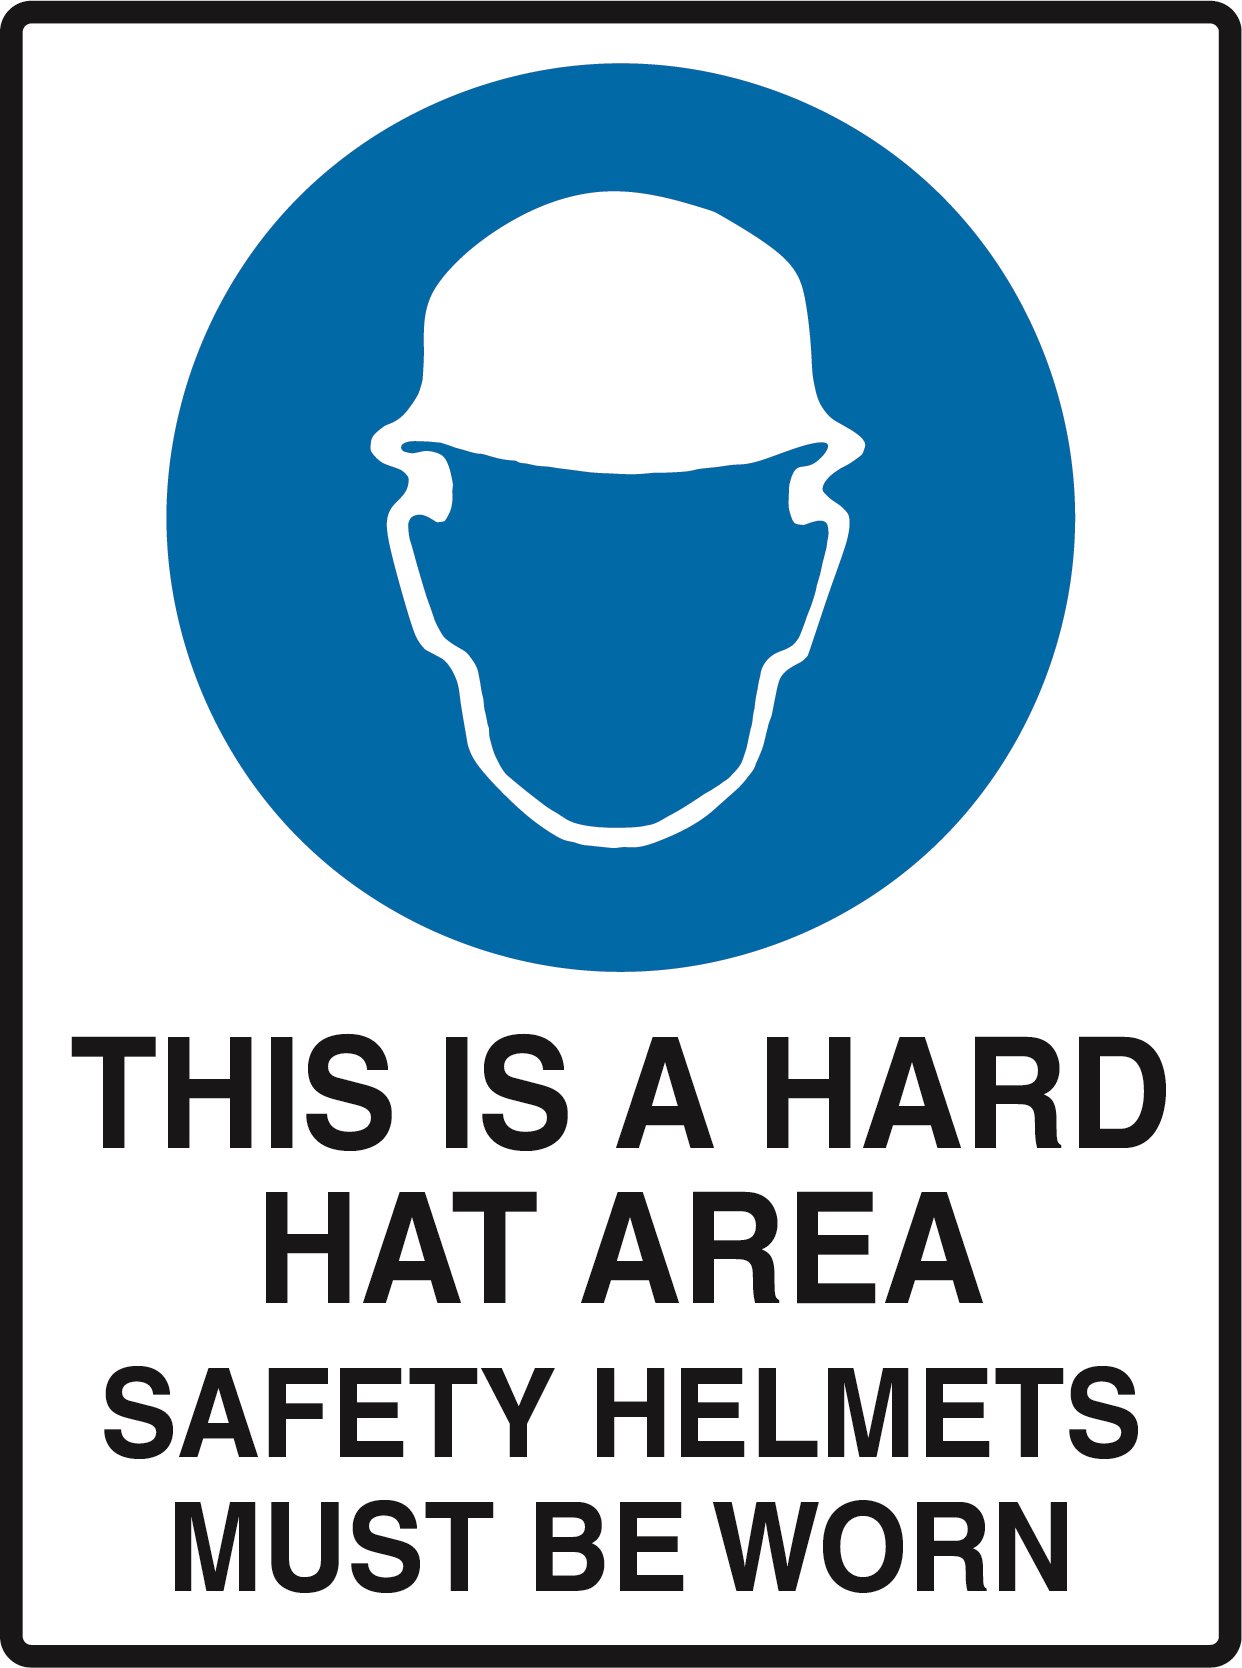 This Is A Hard Hat Area - Safet Helmats must be worn